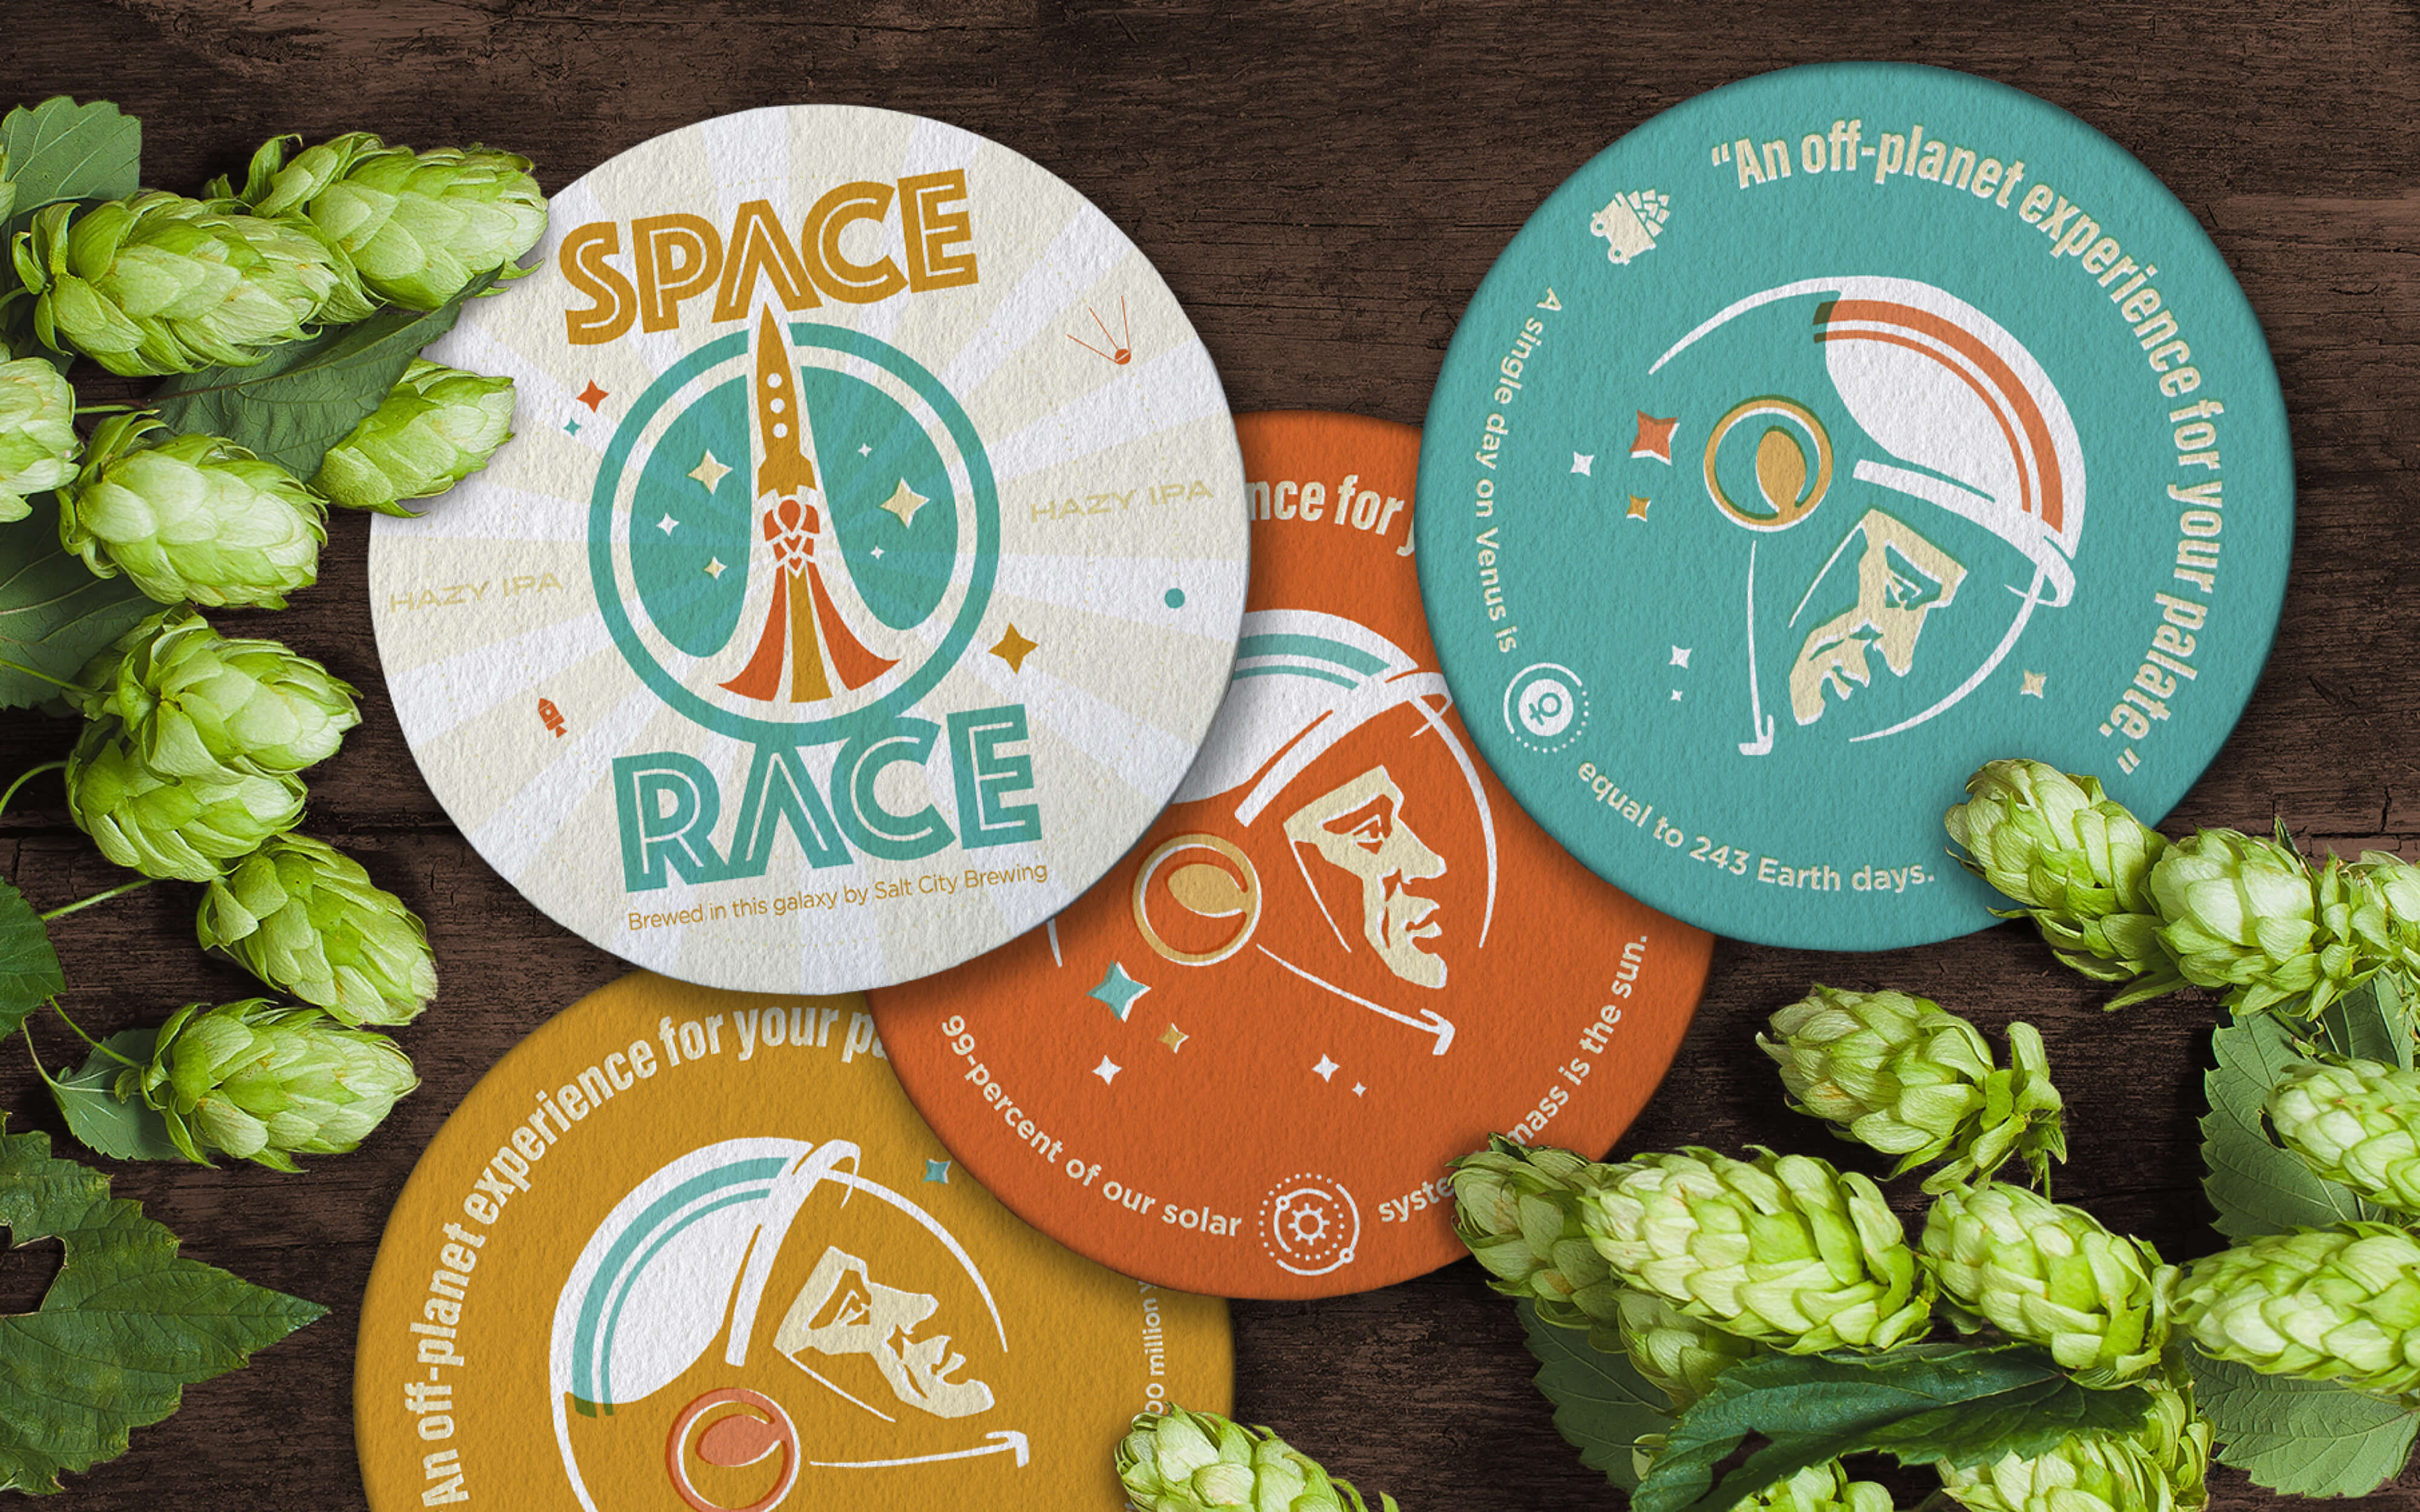 Space Race coasters image